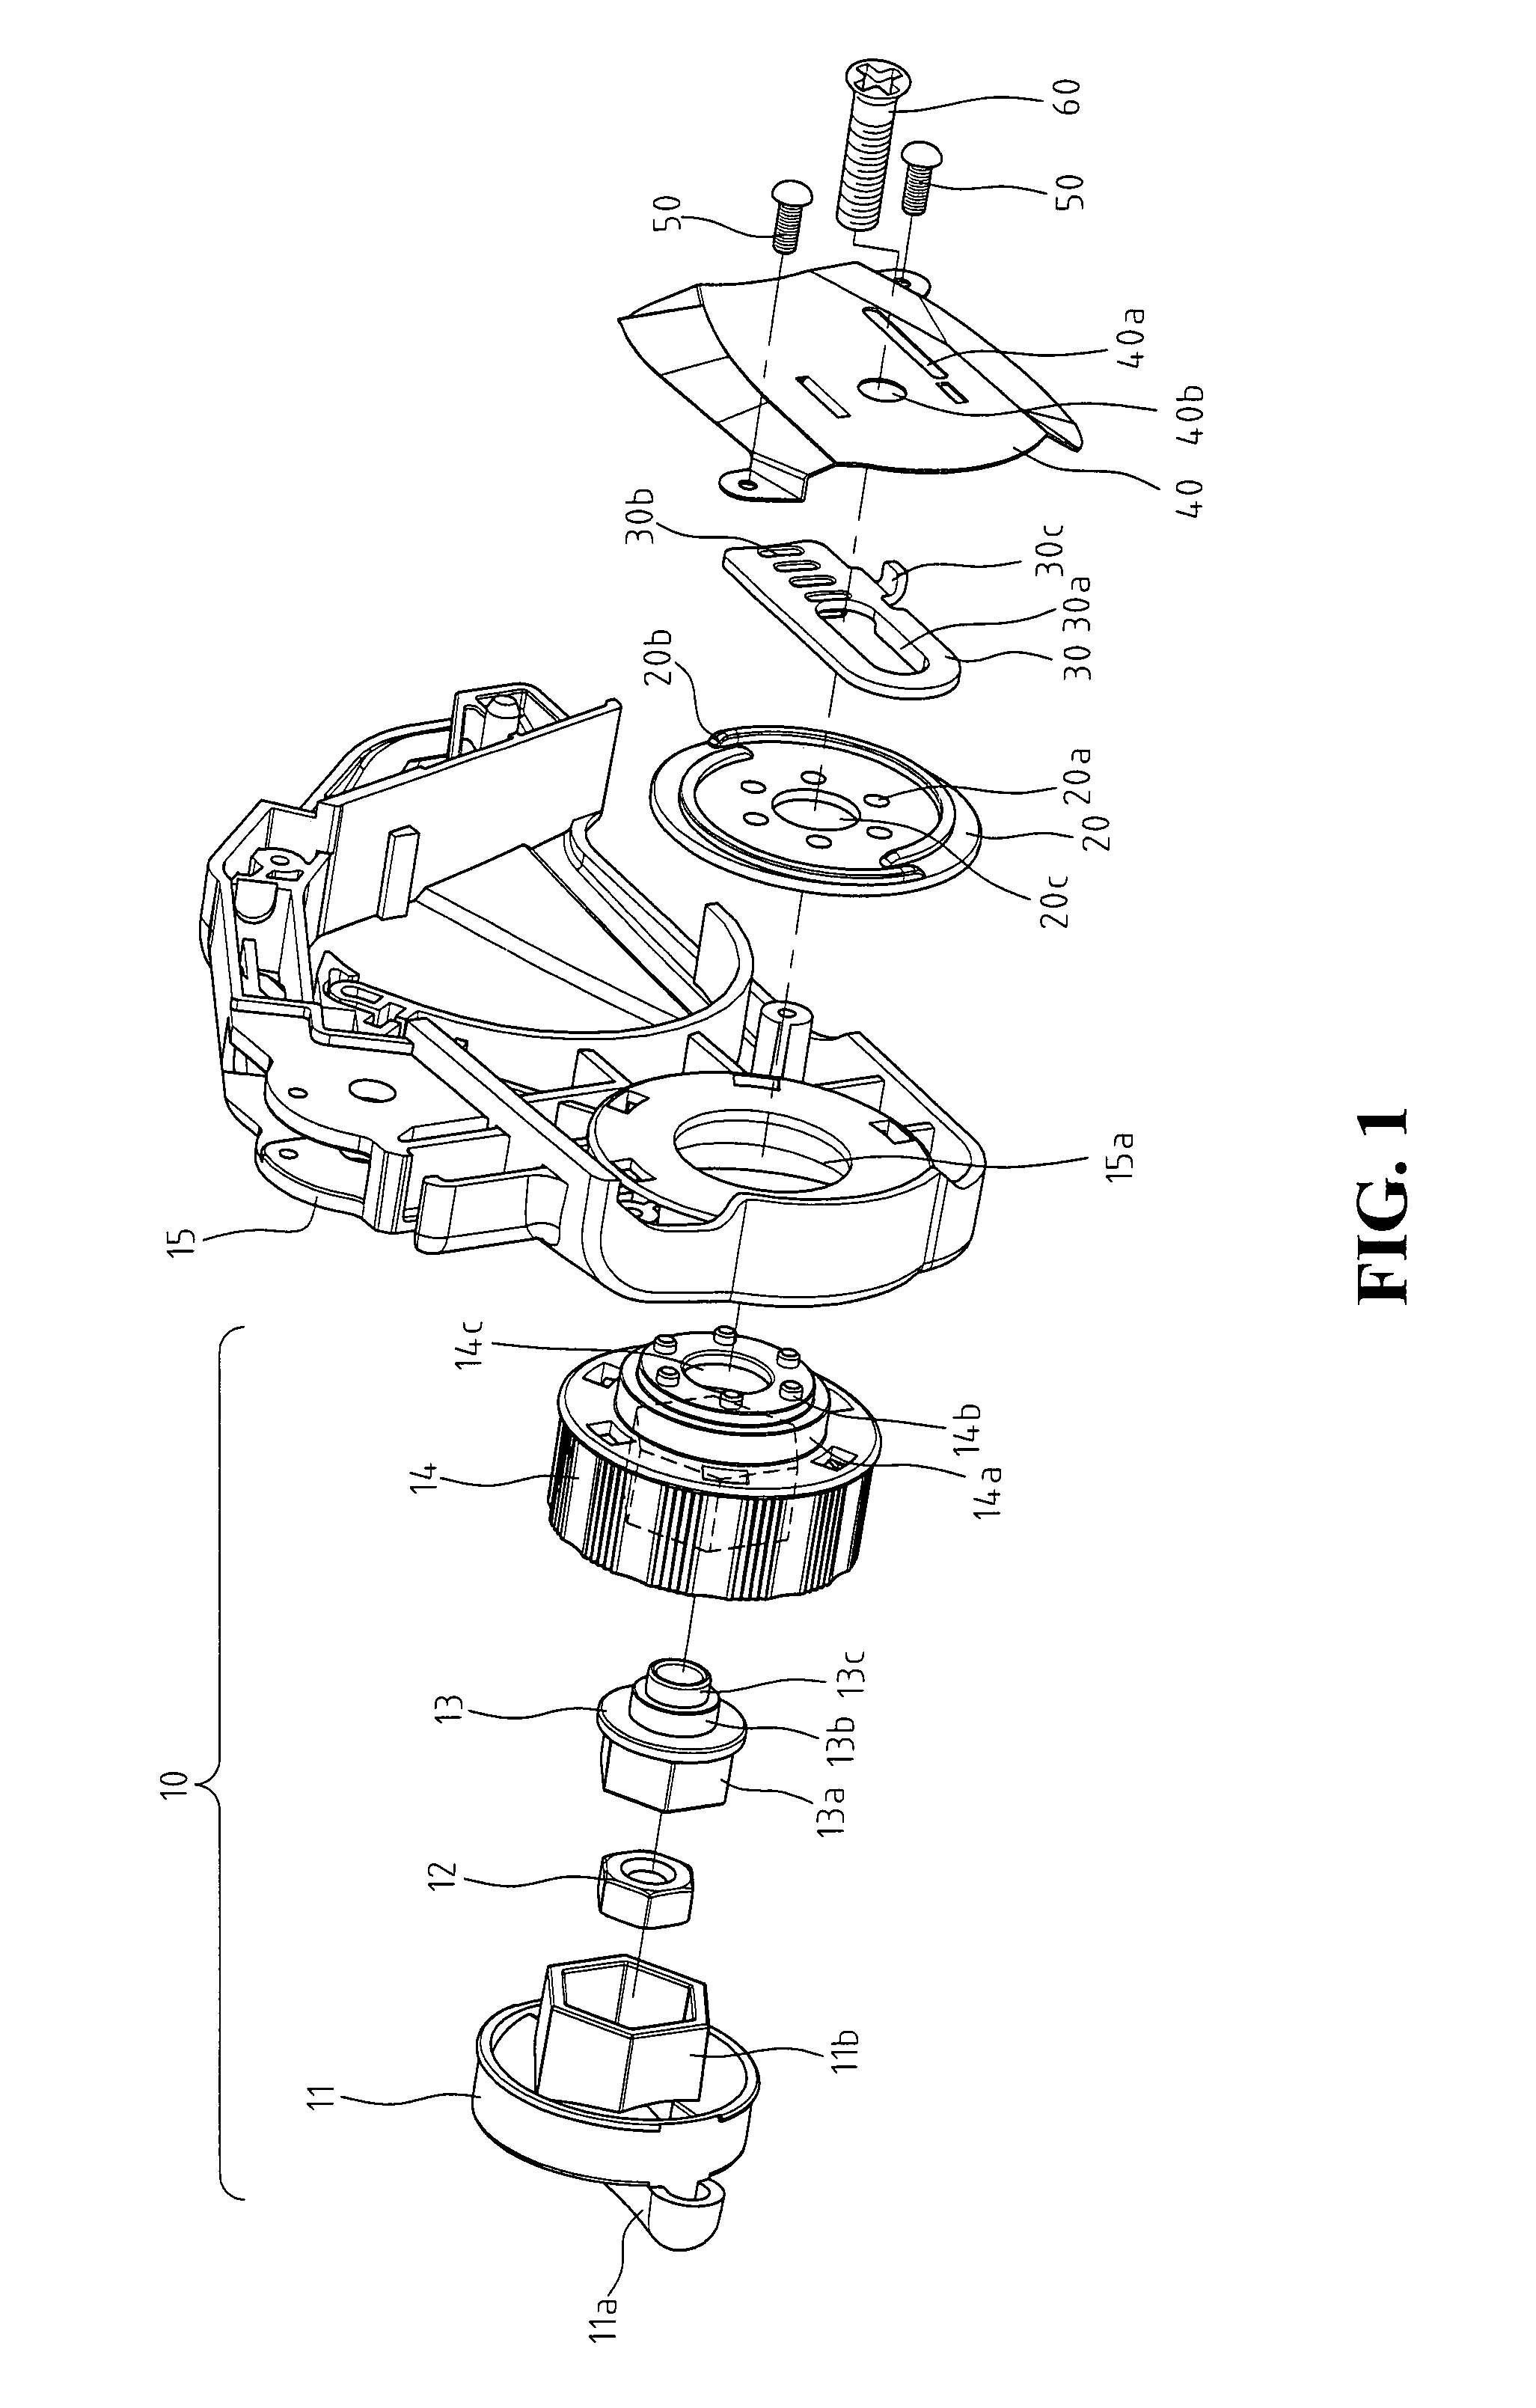 Tension-adjusting device for a chain in chain saw